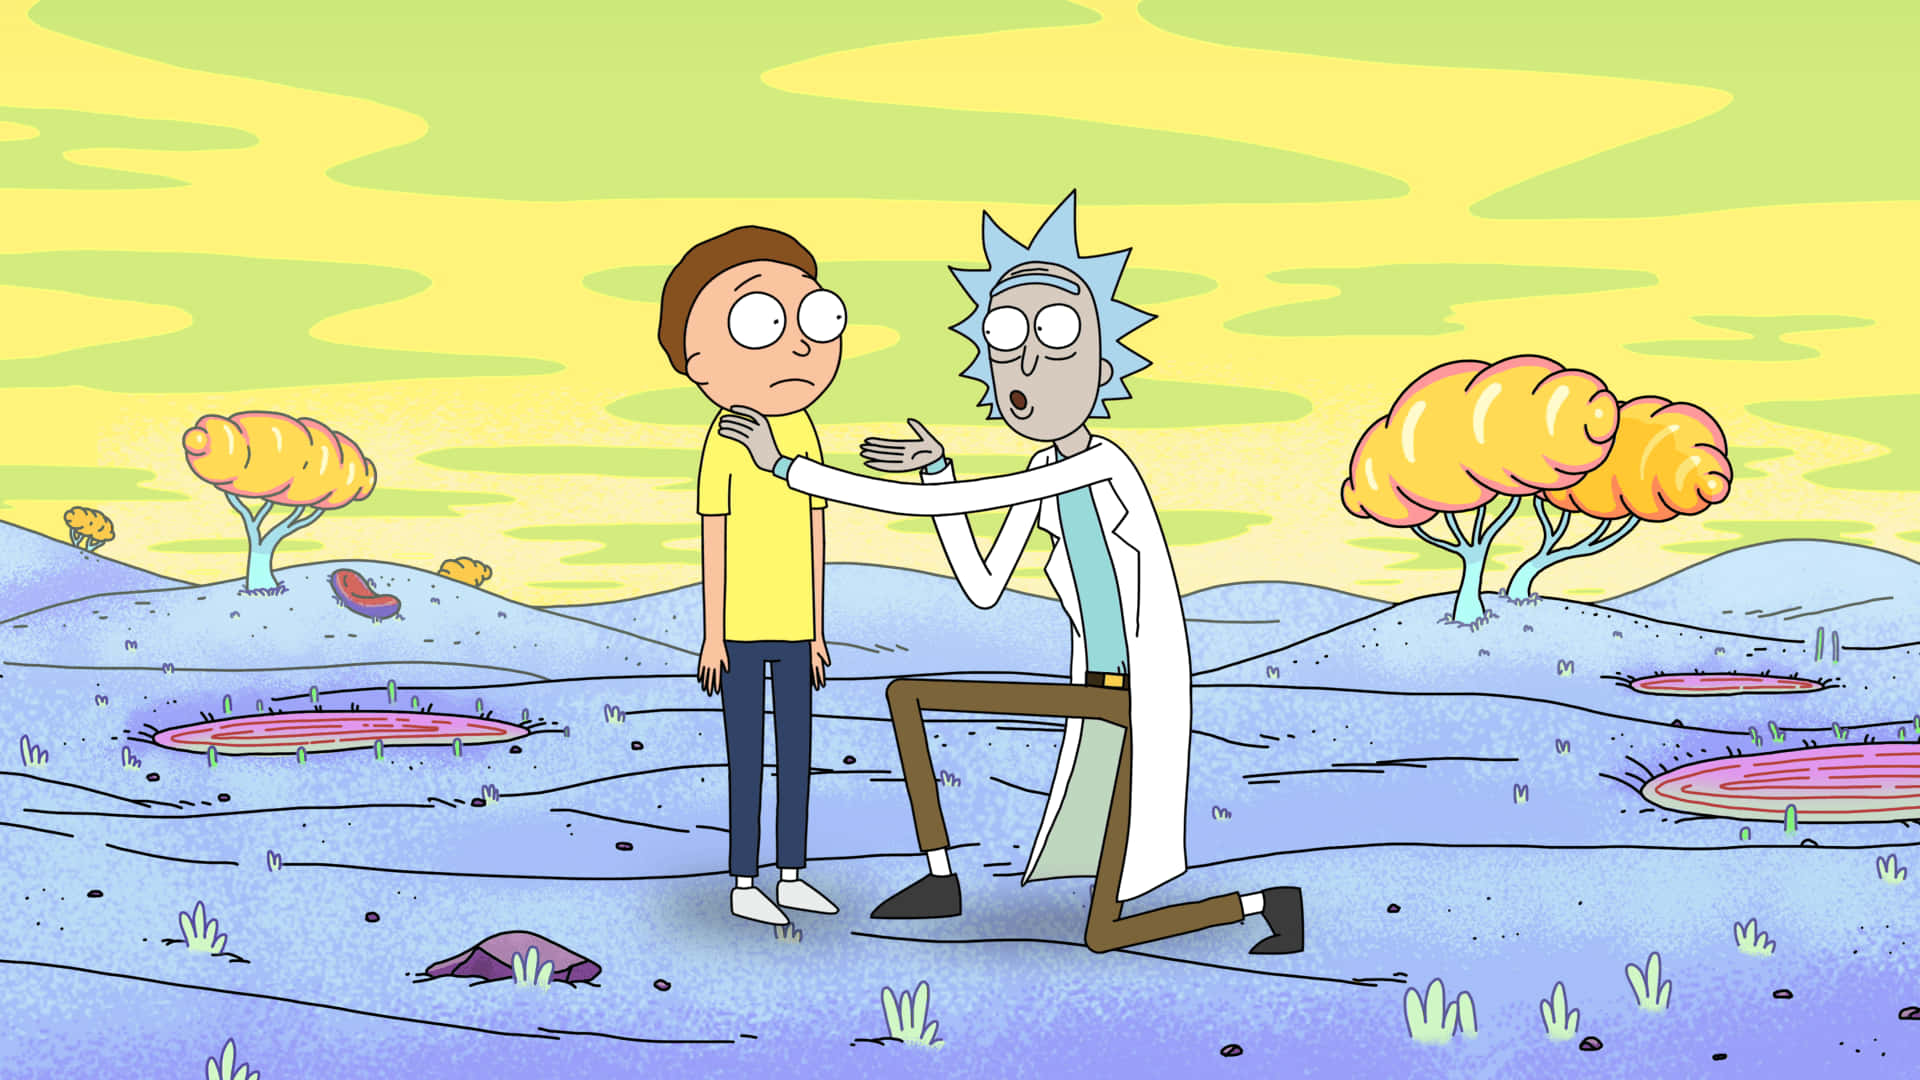 Taking a break from intergalactic adventures, Rick and Morty enjoy some time in the wild outdoors. Wallpaper